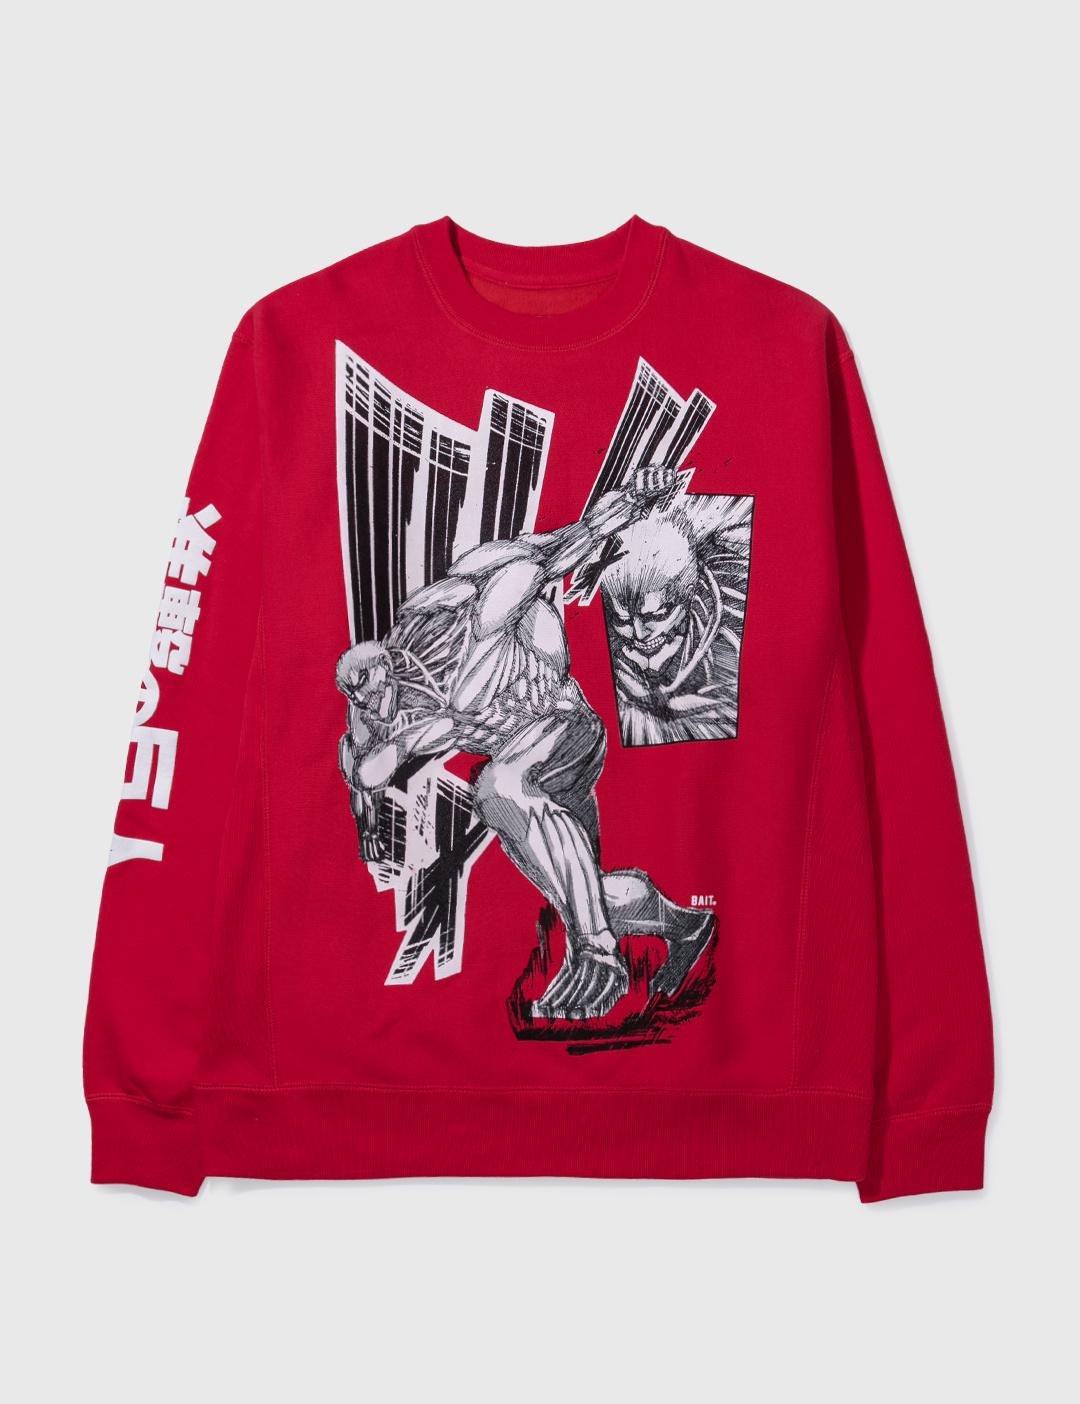 BAIT X ATTACK ON TITAN GRAPHIC PRINT T-SHIRT by BAIT